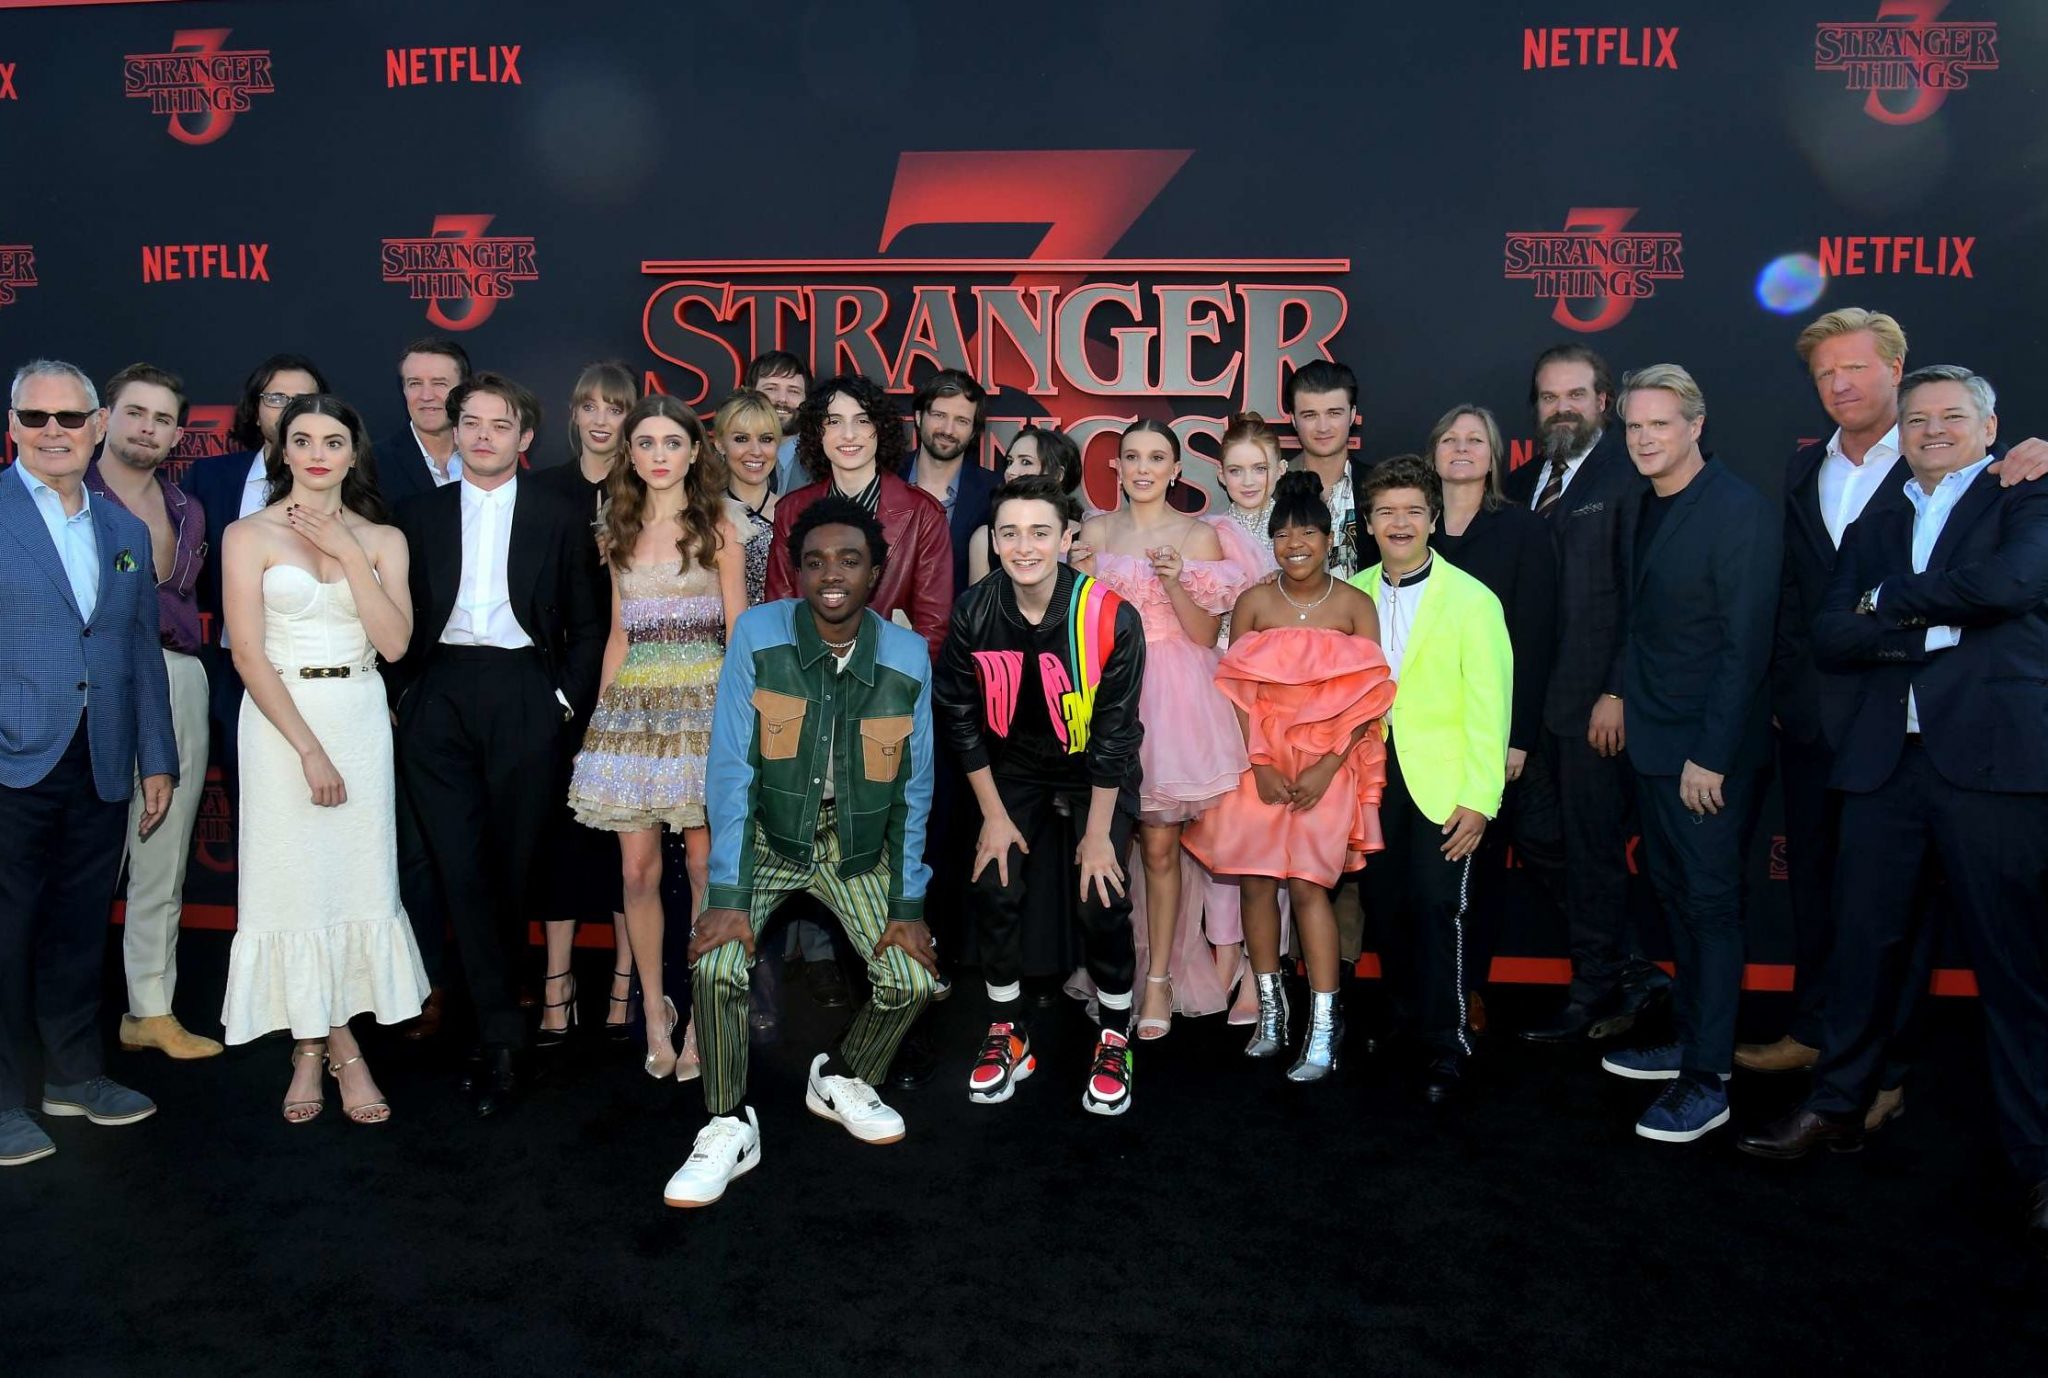 Stranger Things Season 4 Release Date, Cast, Plot, Trailer, And Every